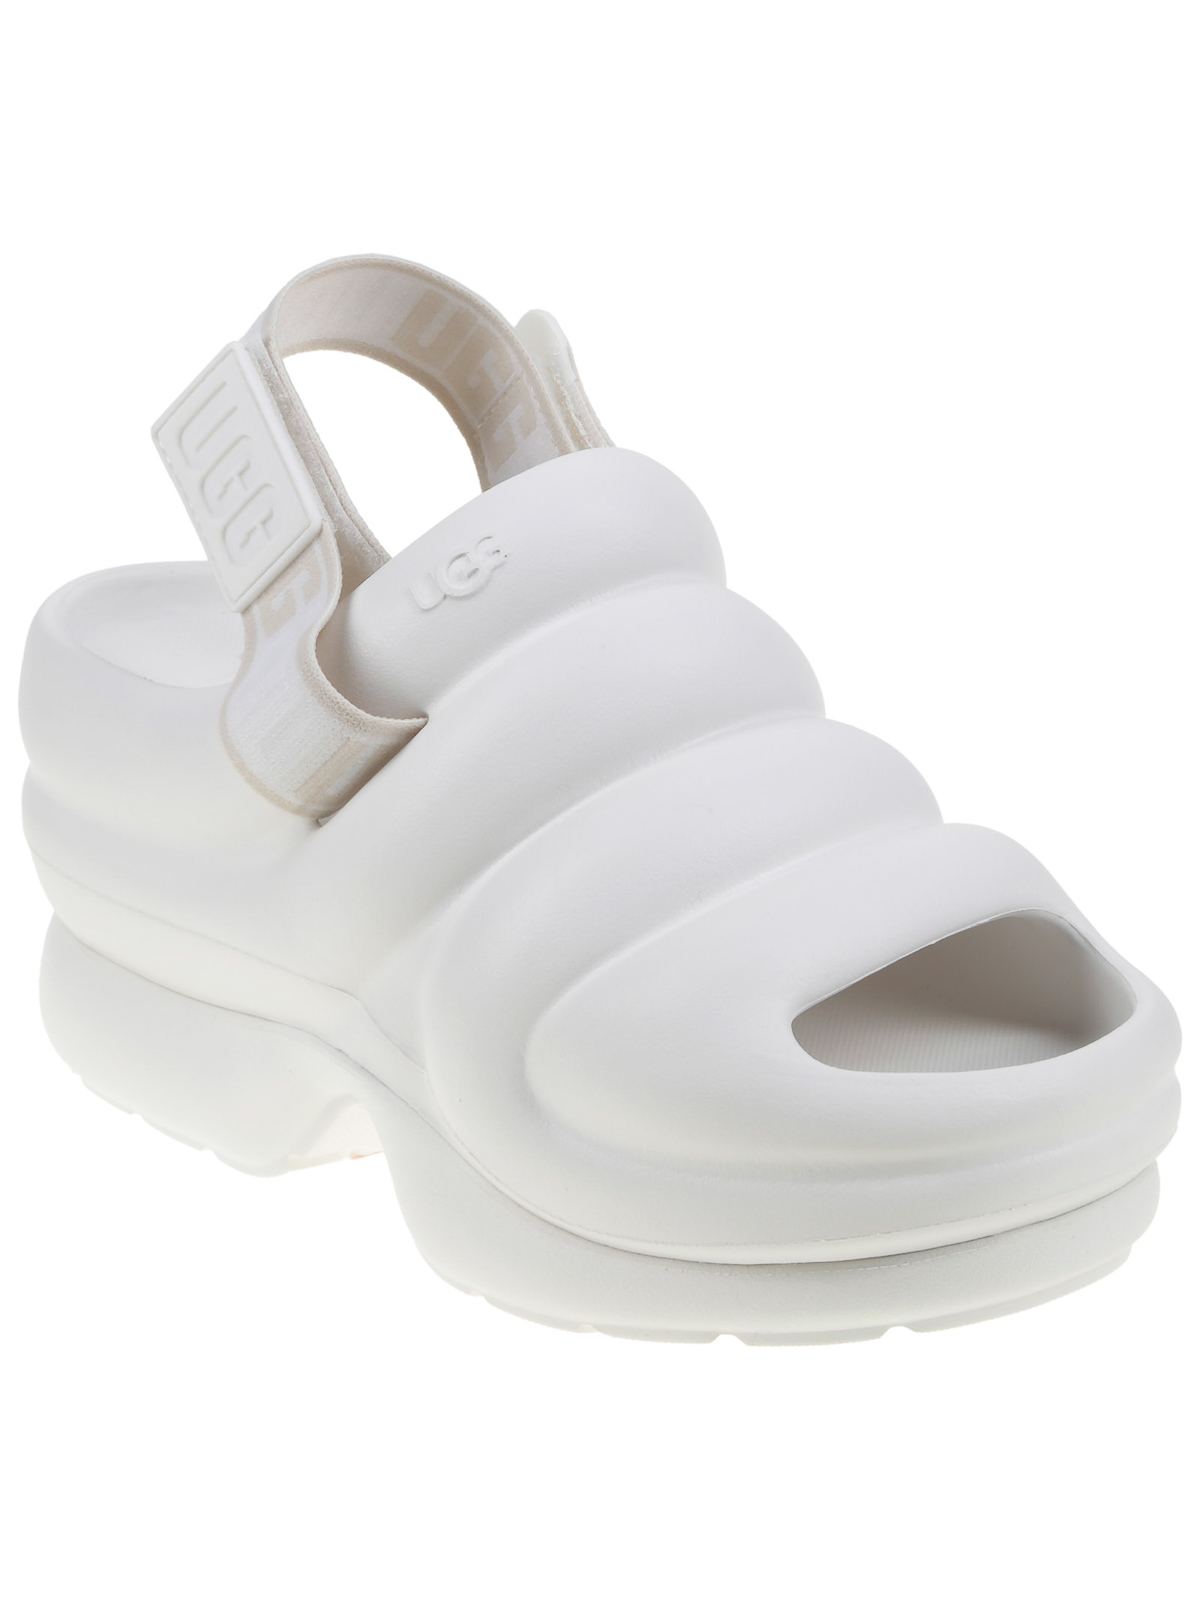 Sandals Ugg - Aww yeah - 1136762WBRIGHT | Shop online at THEBS